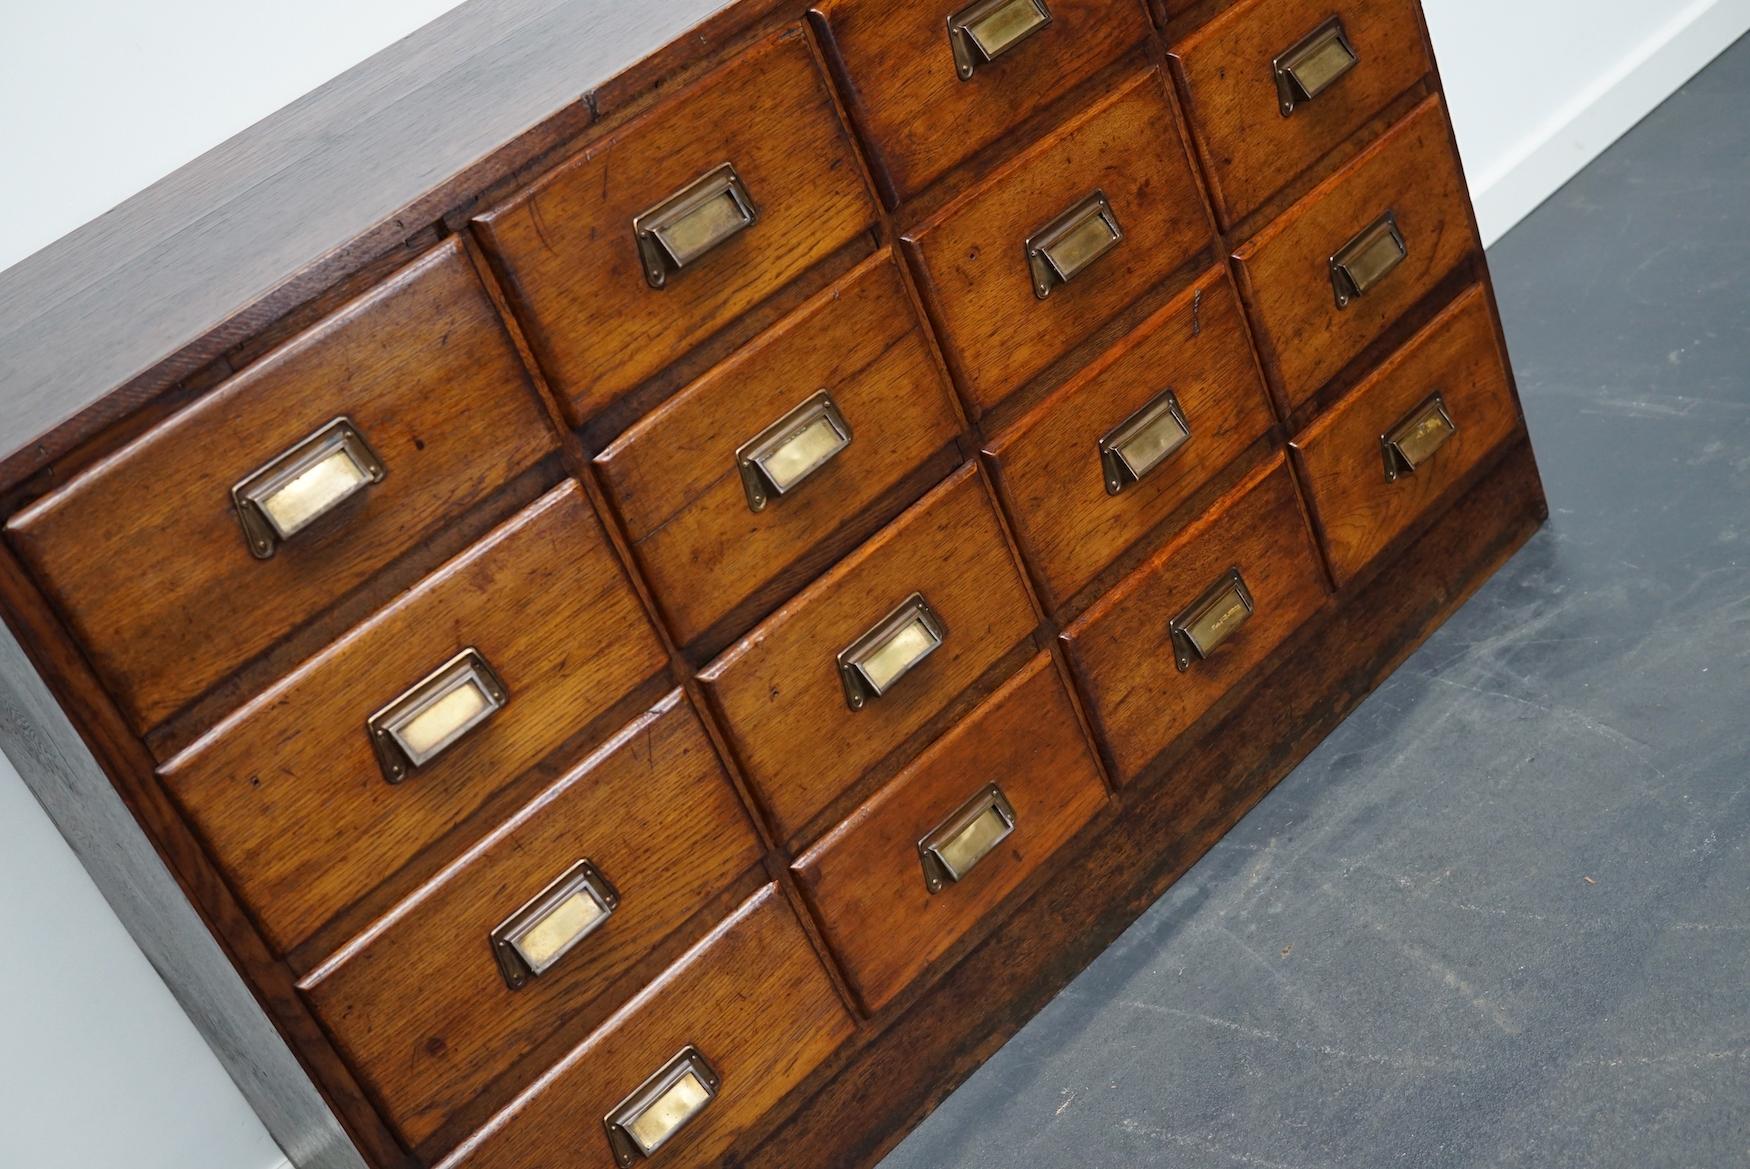 This apothecary cabinet was produced during the 1930s in The Netherlands. This piece features 16 decent sized drawers. The interior dimensions of the drawers are: D W H 32 x 21 x 12 cm and 31 x 26 x 12 cm.